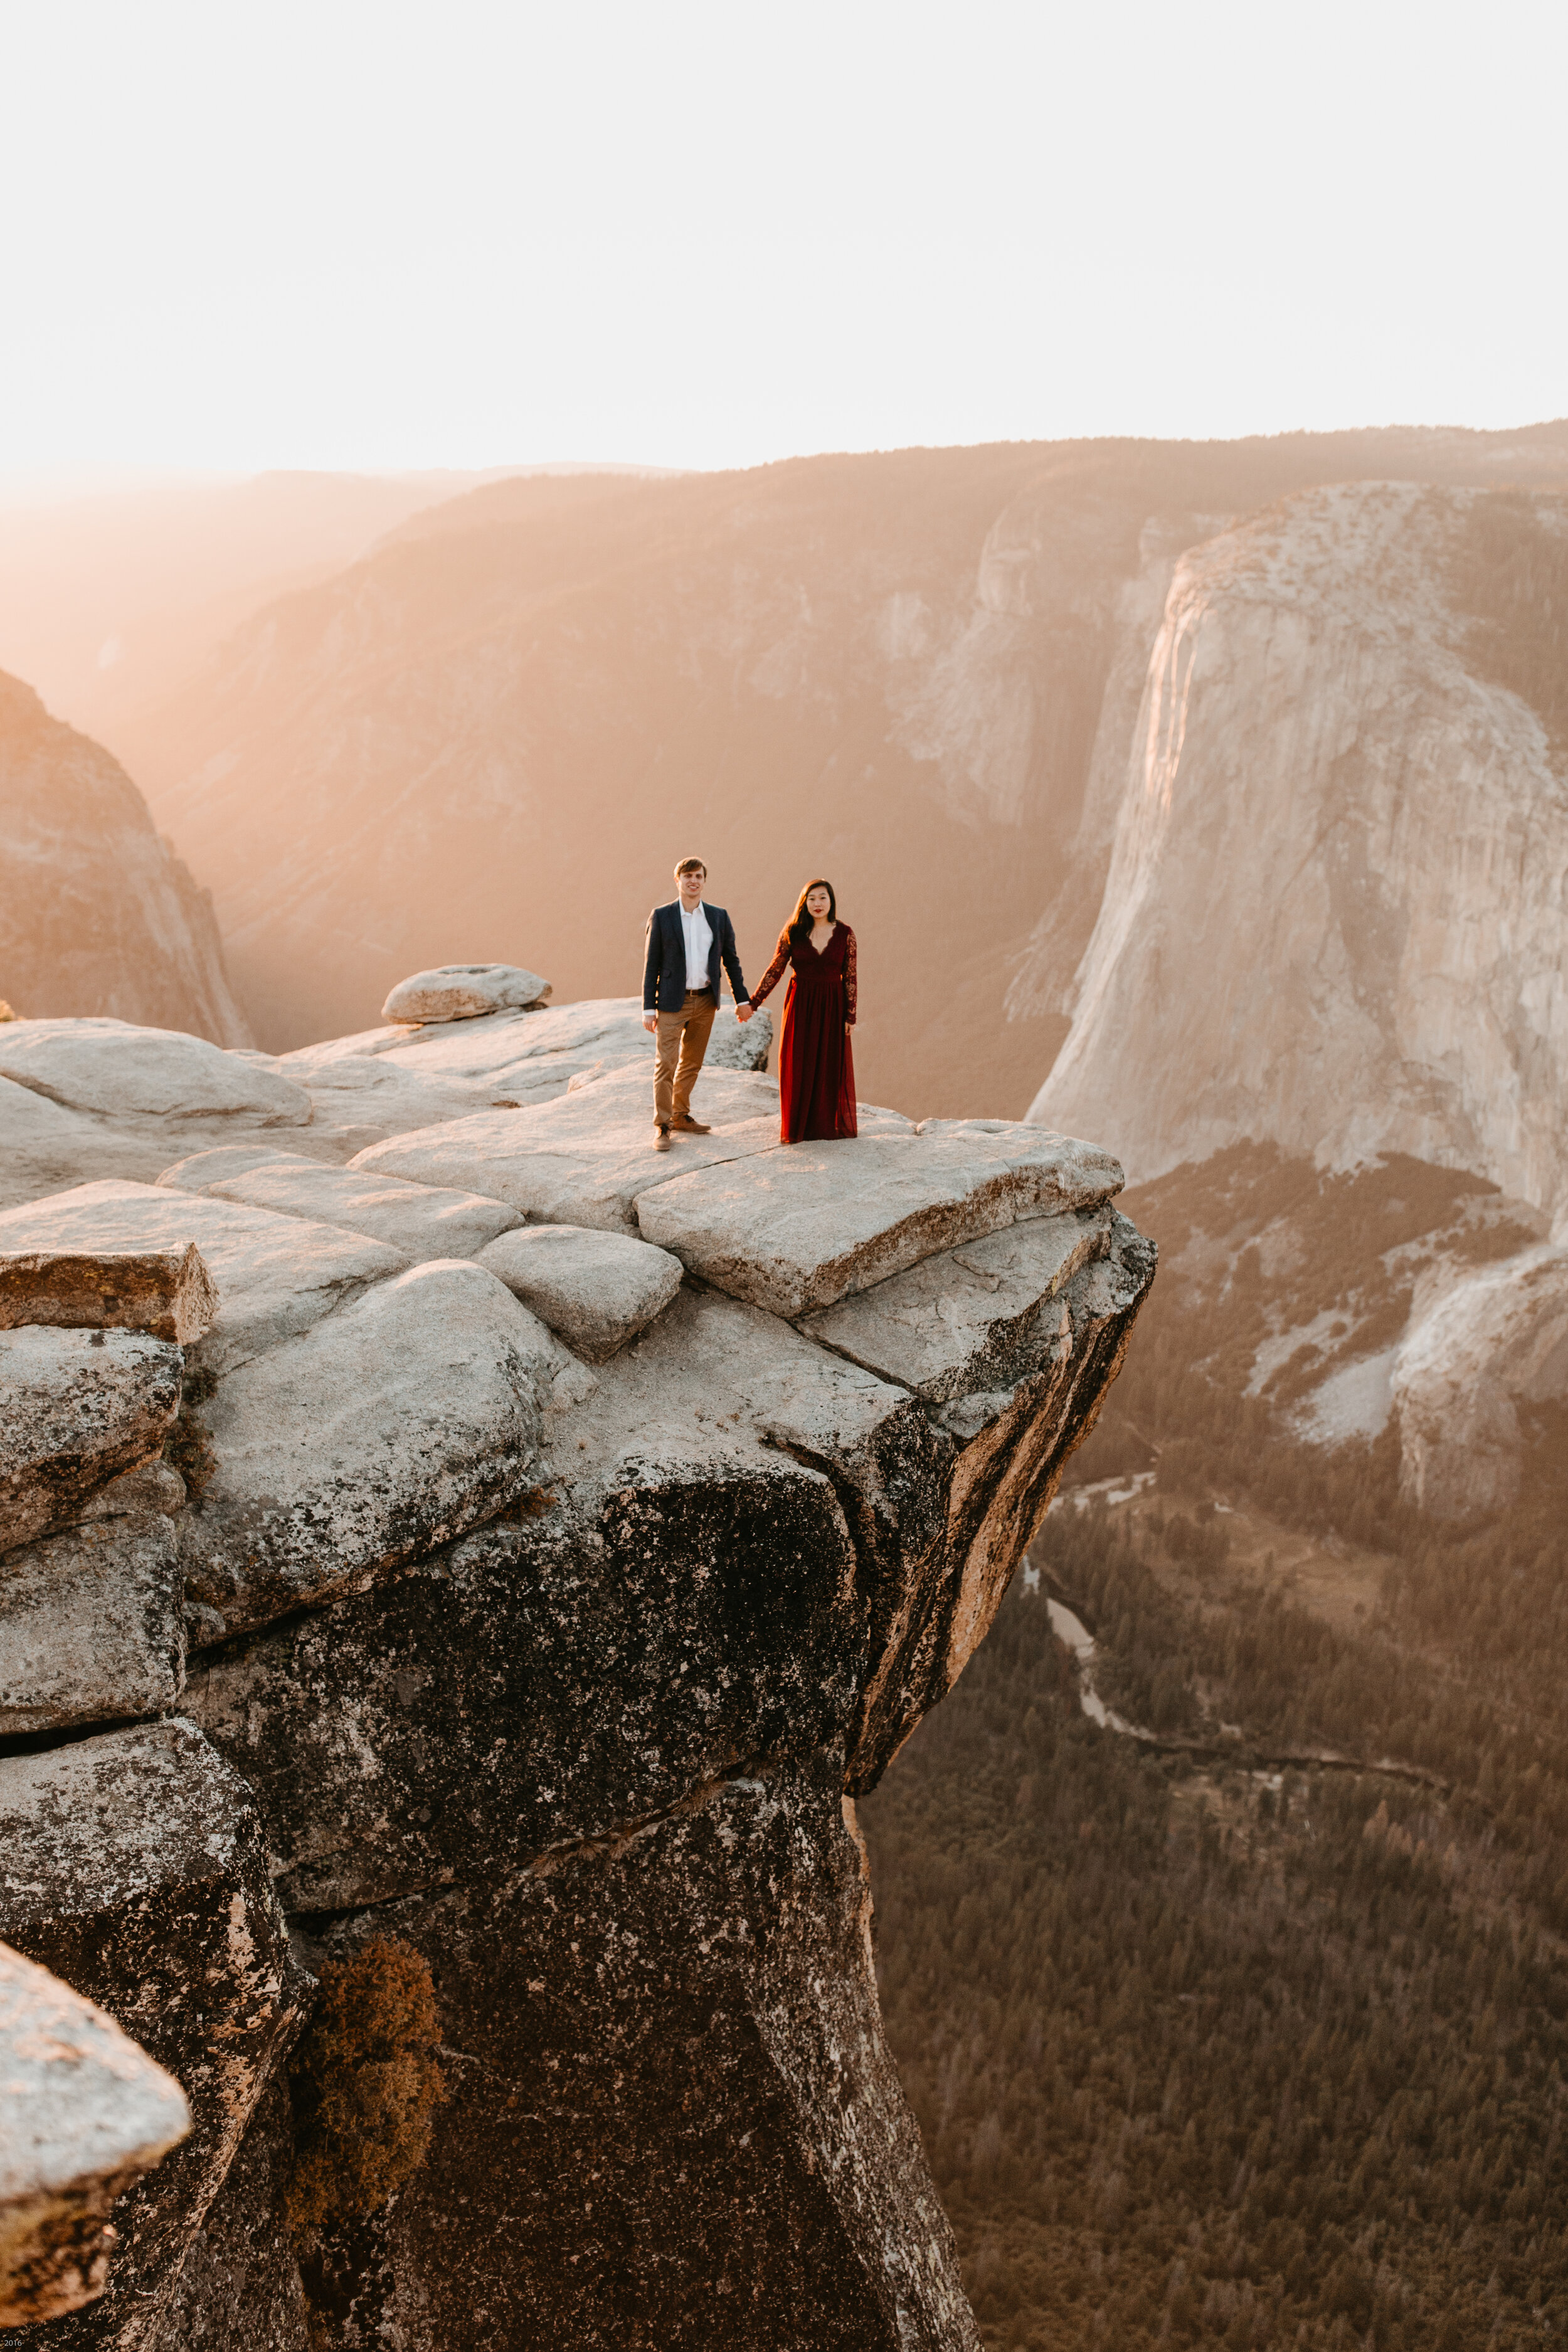 yosemite-national-park-couples-session-at-taft-point-and-yosemite-valley-yosemite-elopement-photographer-nicole-daacke-photography-154.jpg